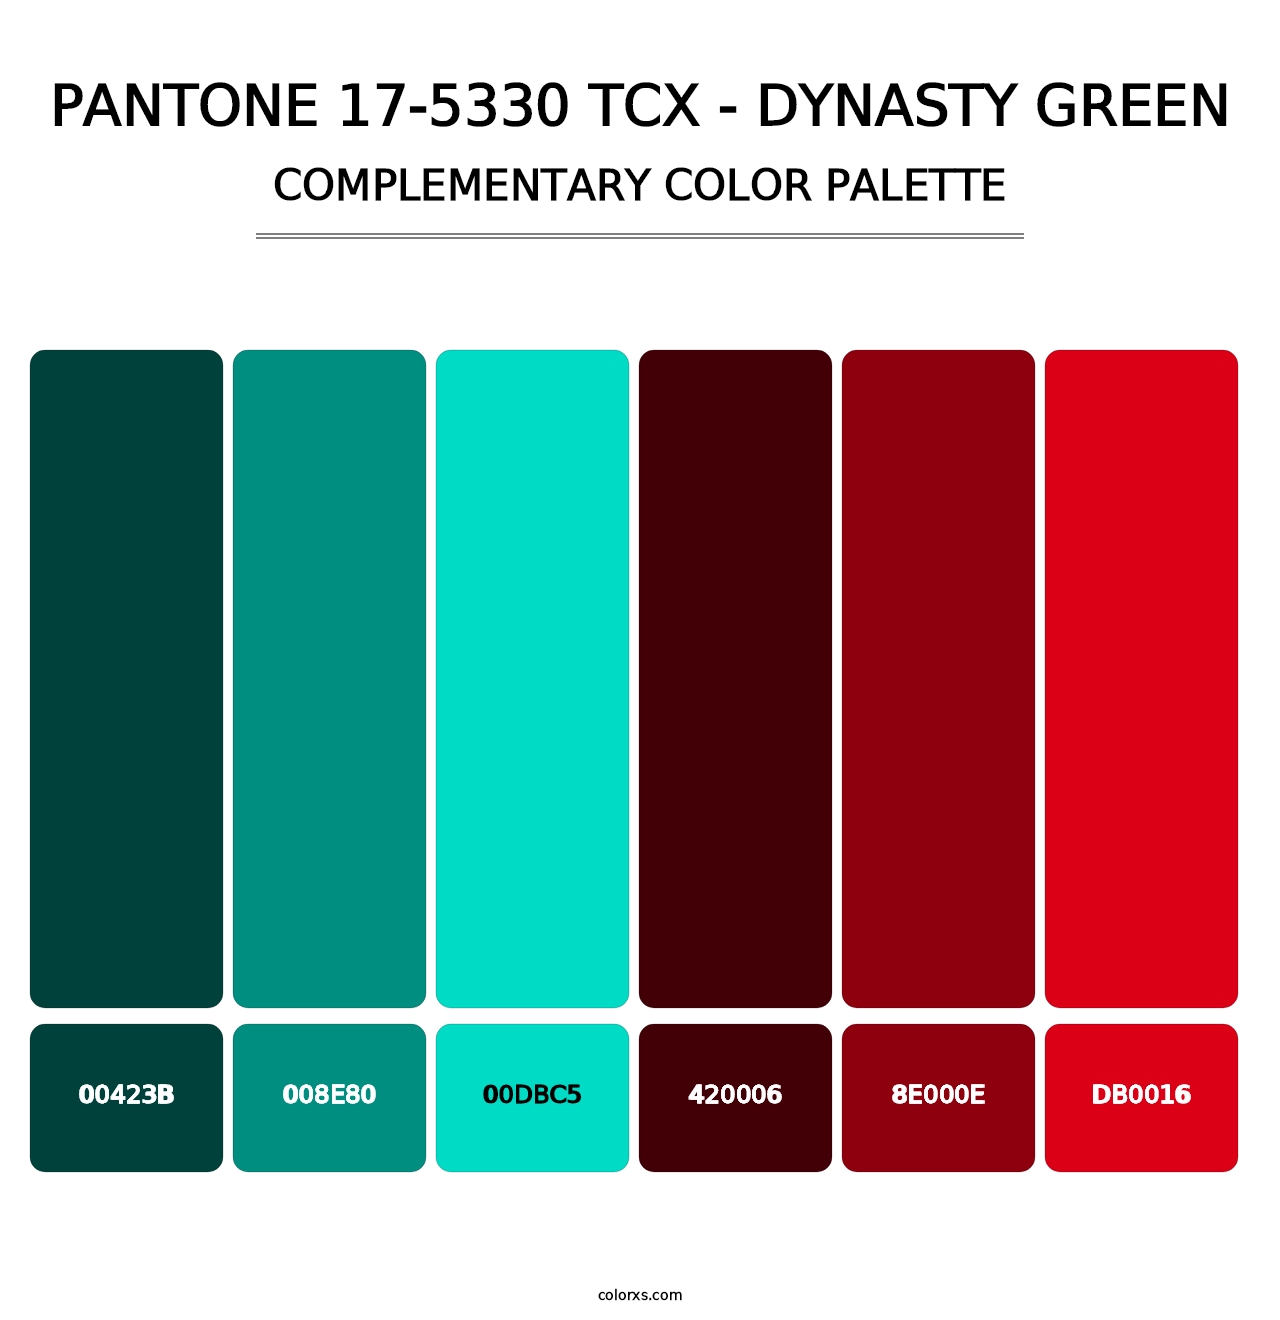 PANTONE 17-5330 TCX - Dynasty Green - Complementary Color Palette